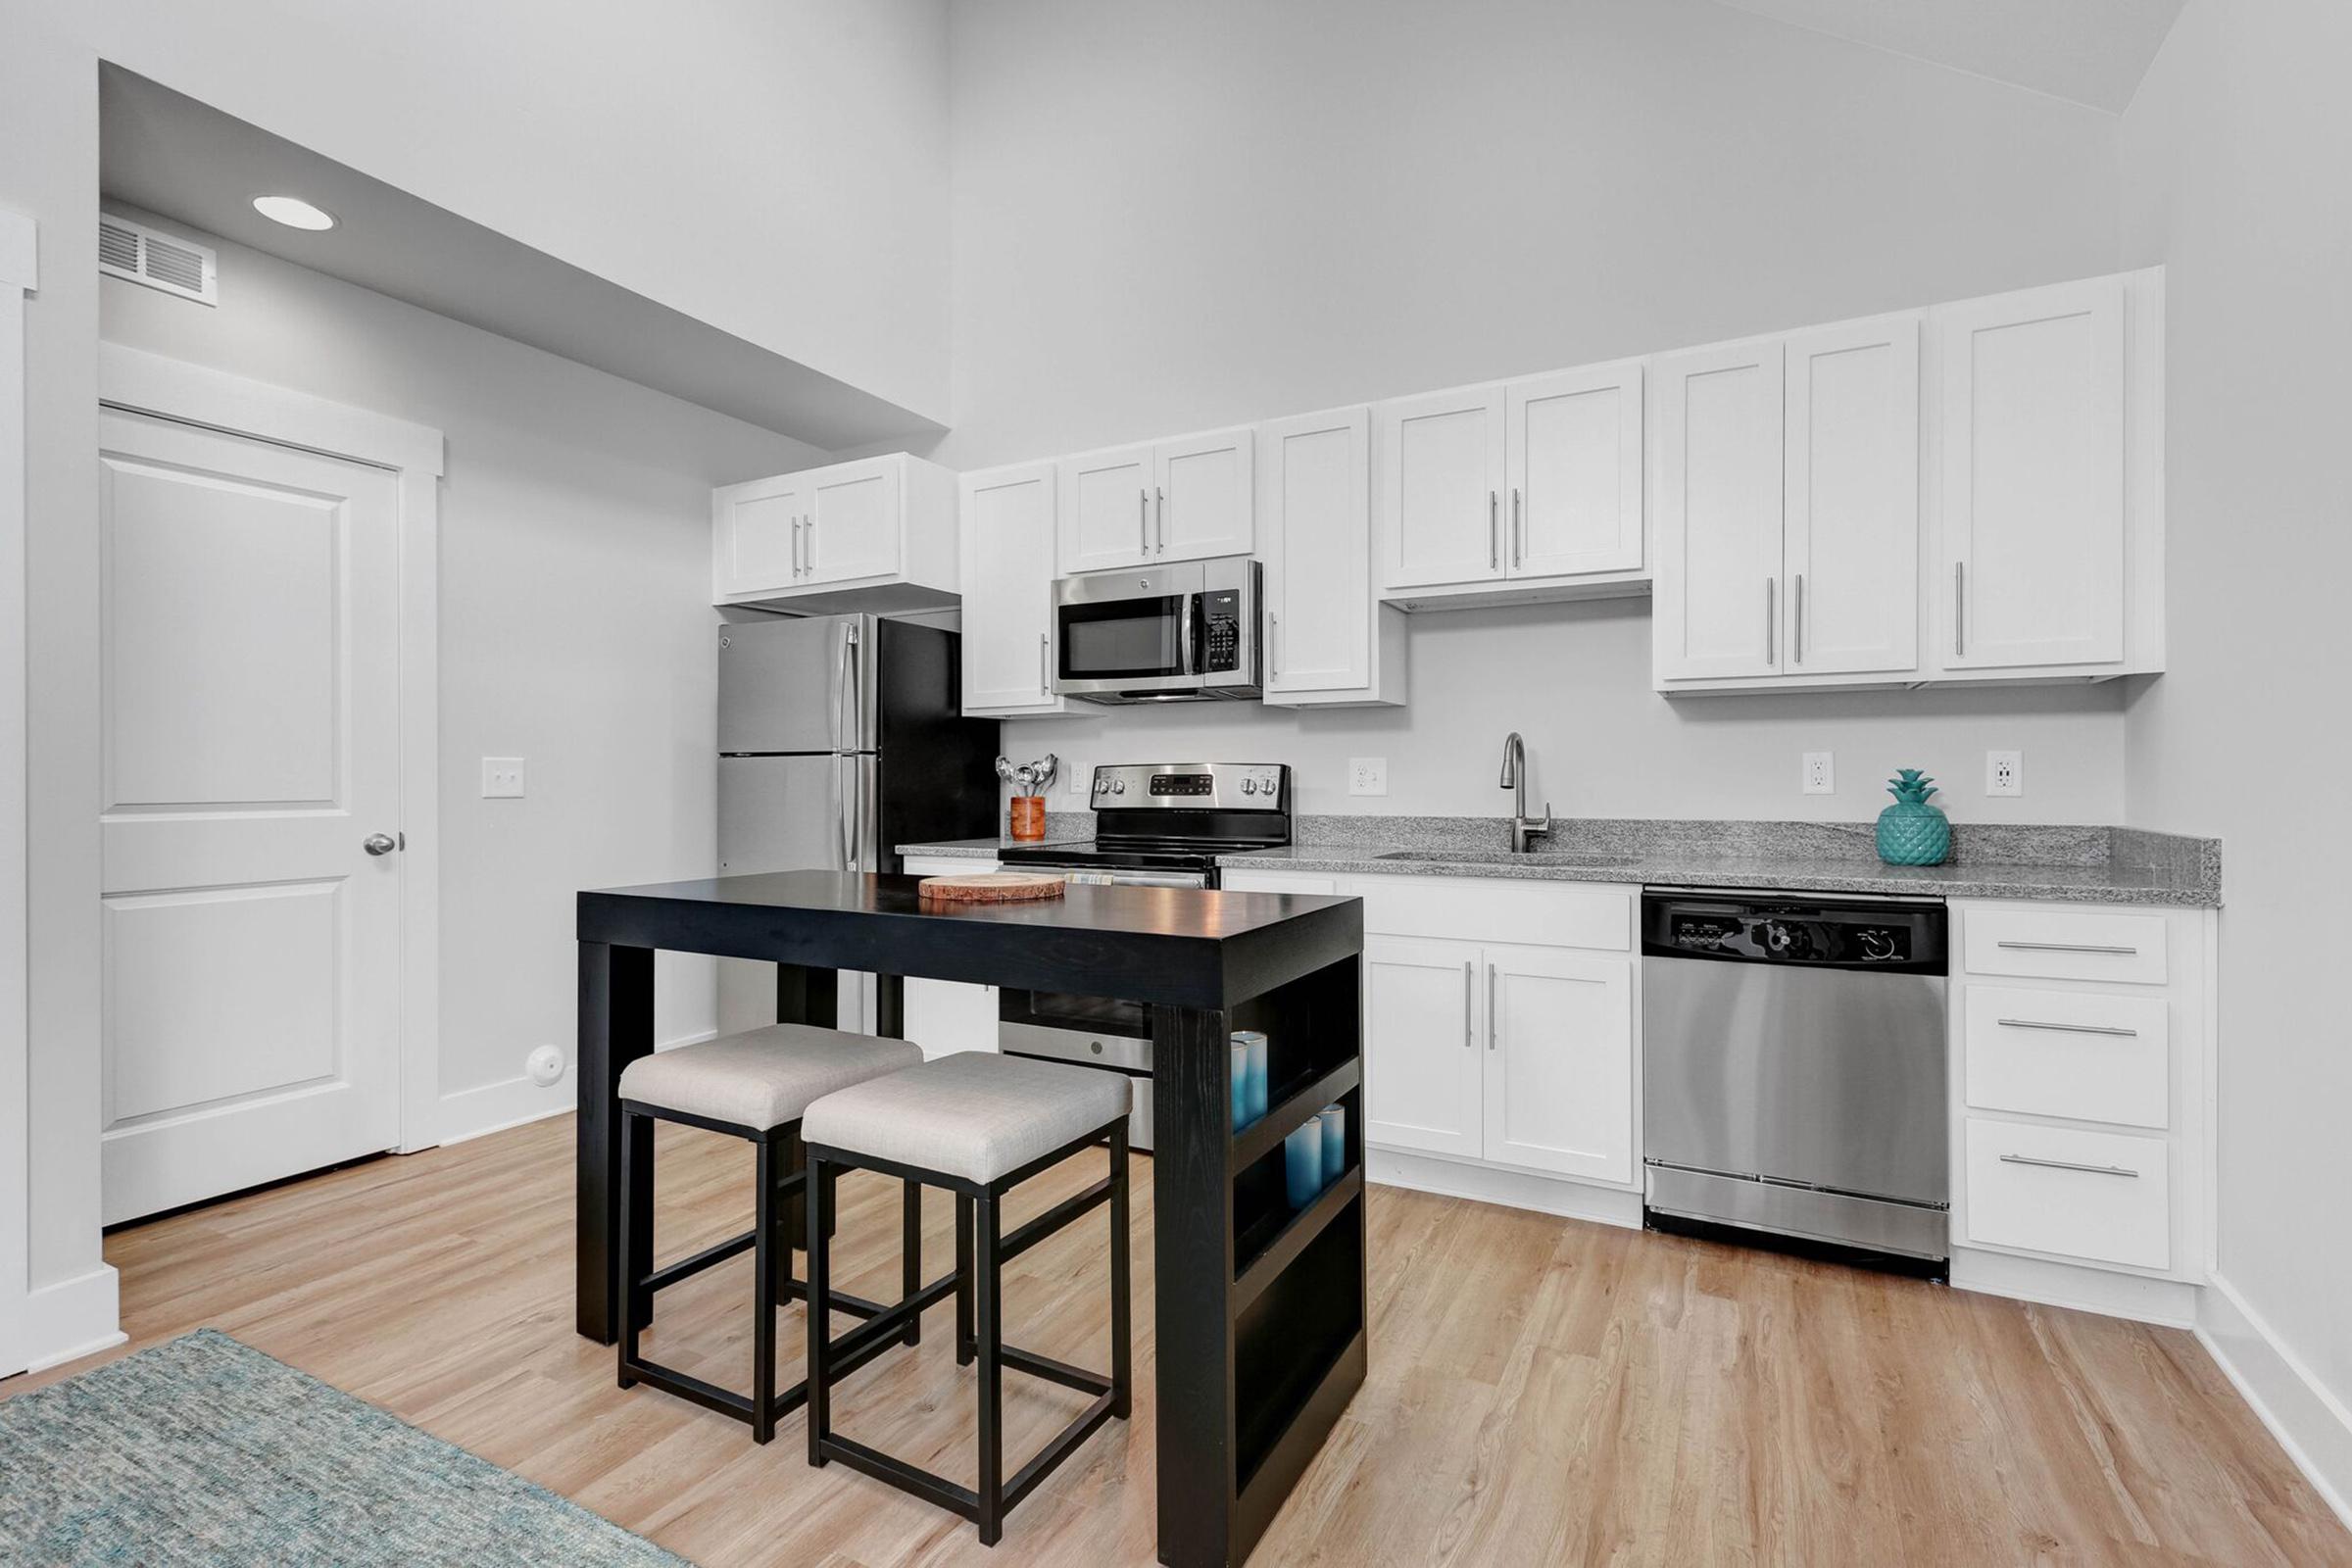 Modern kitchens in The Townhomes at Beau Rivage in Wilmington, NC.